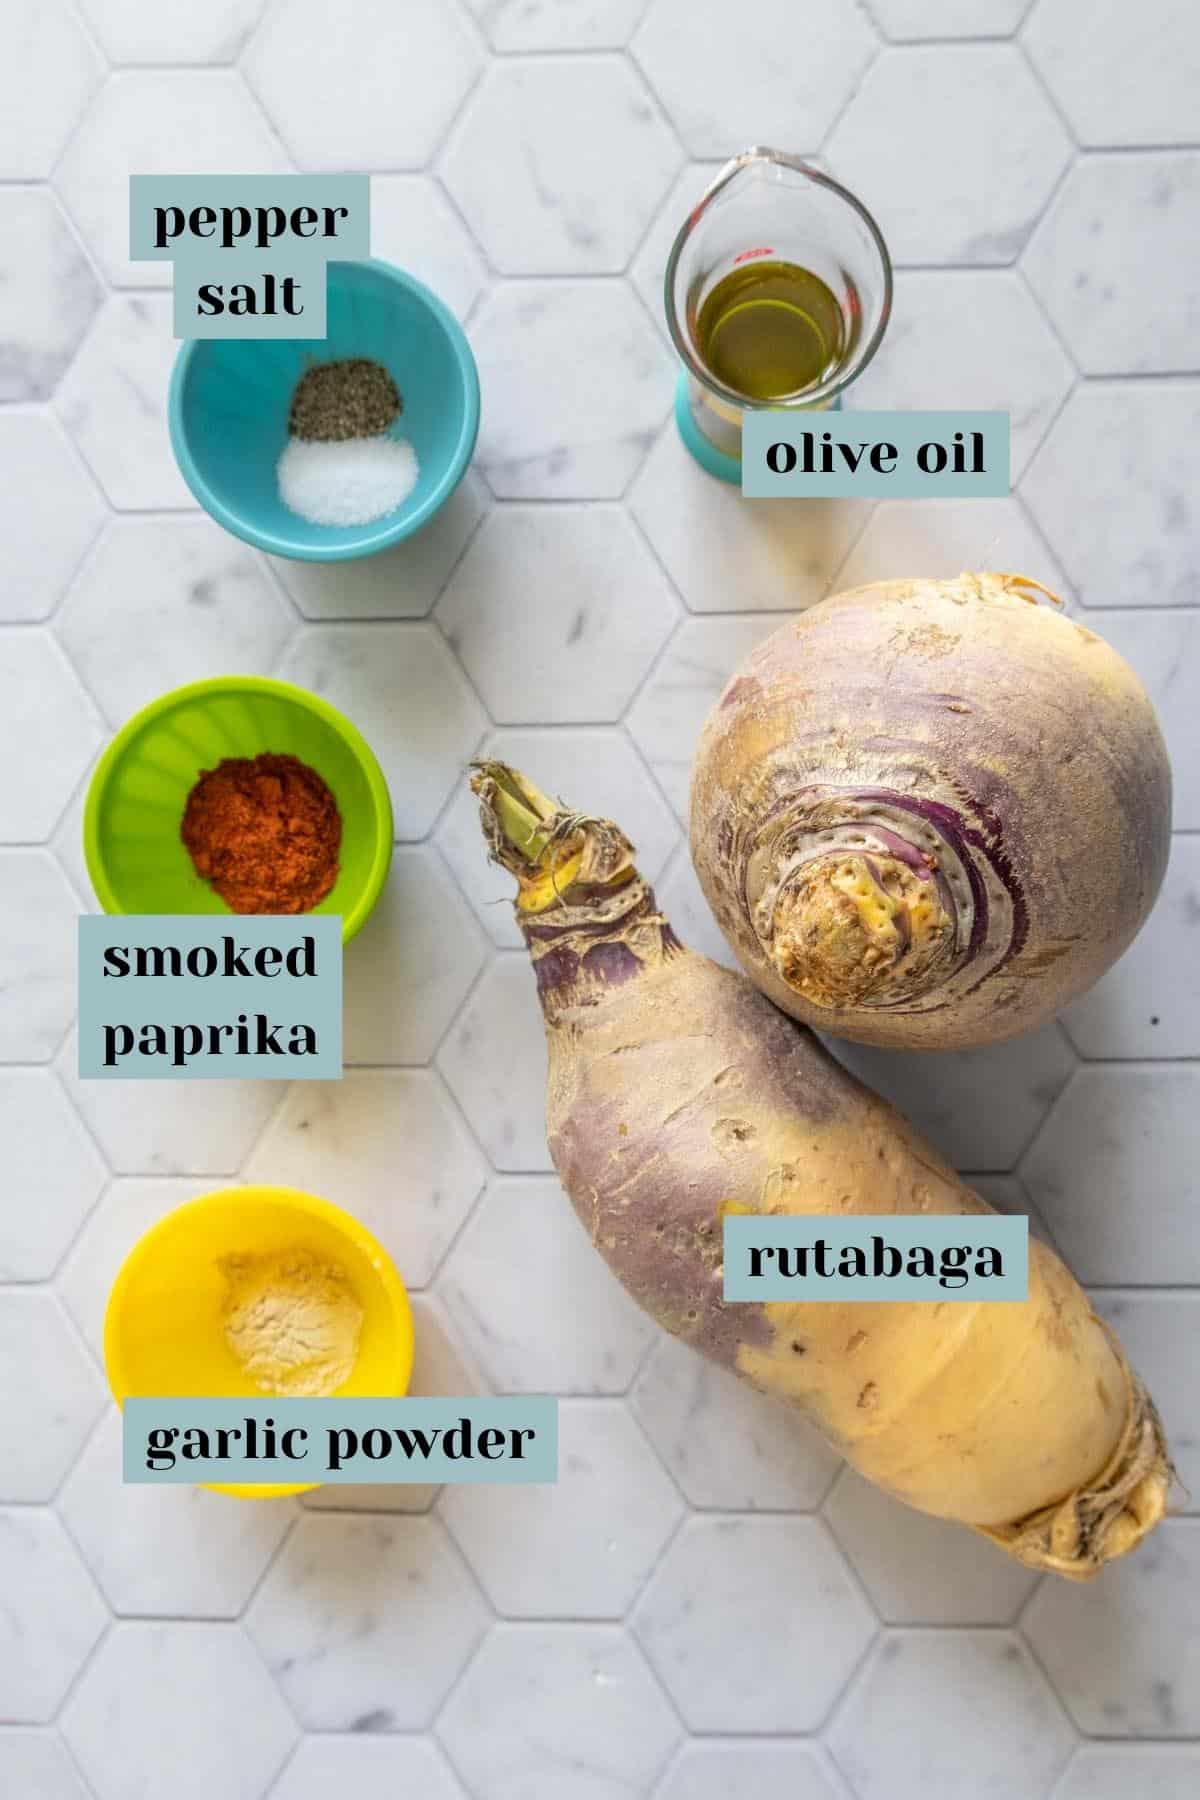 Ingredients for rutabaga fries on a tile surface with labels.